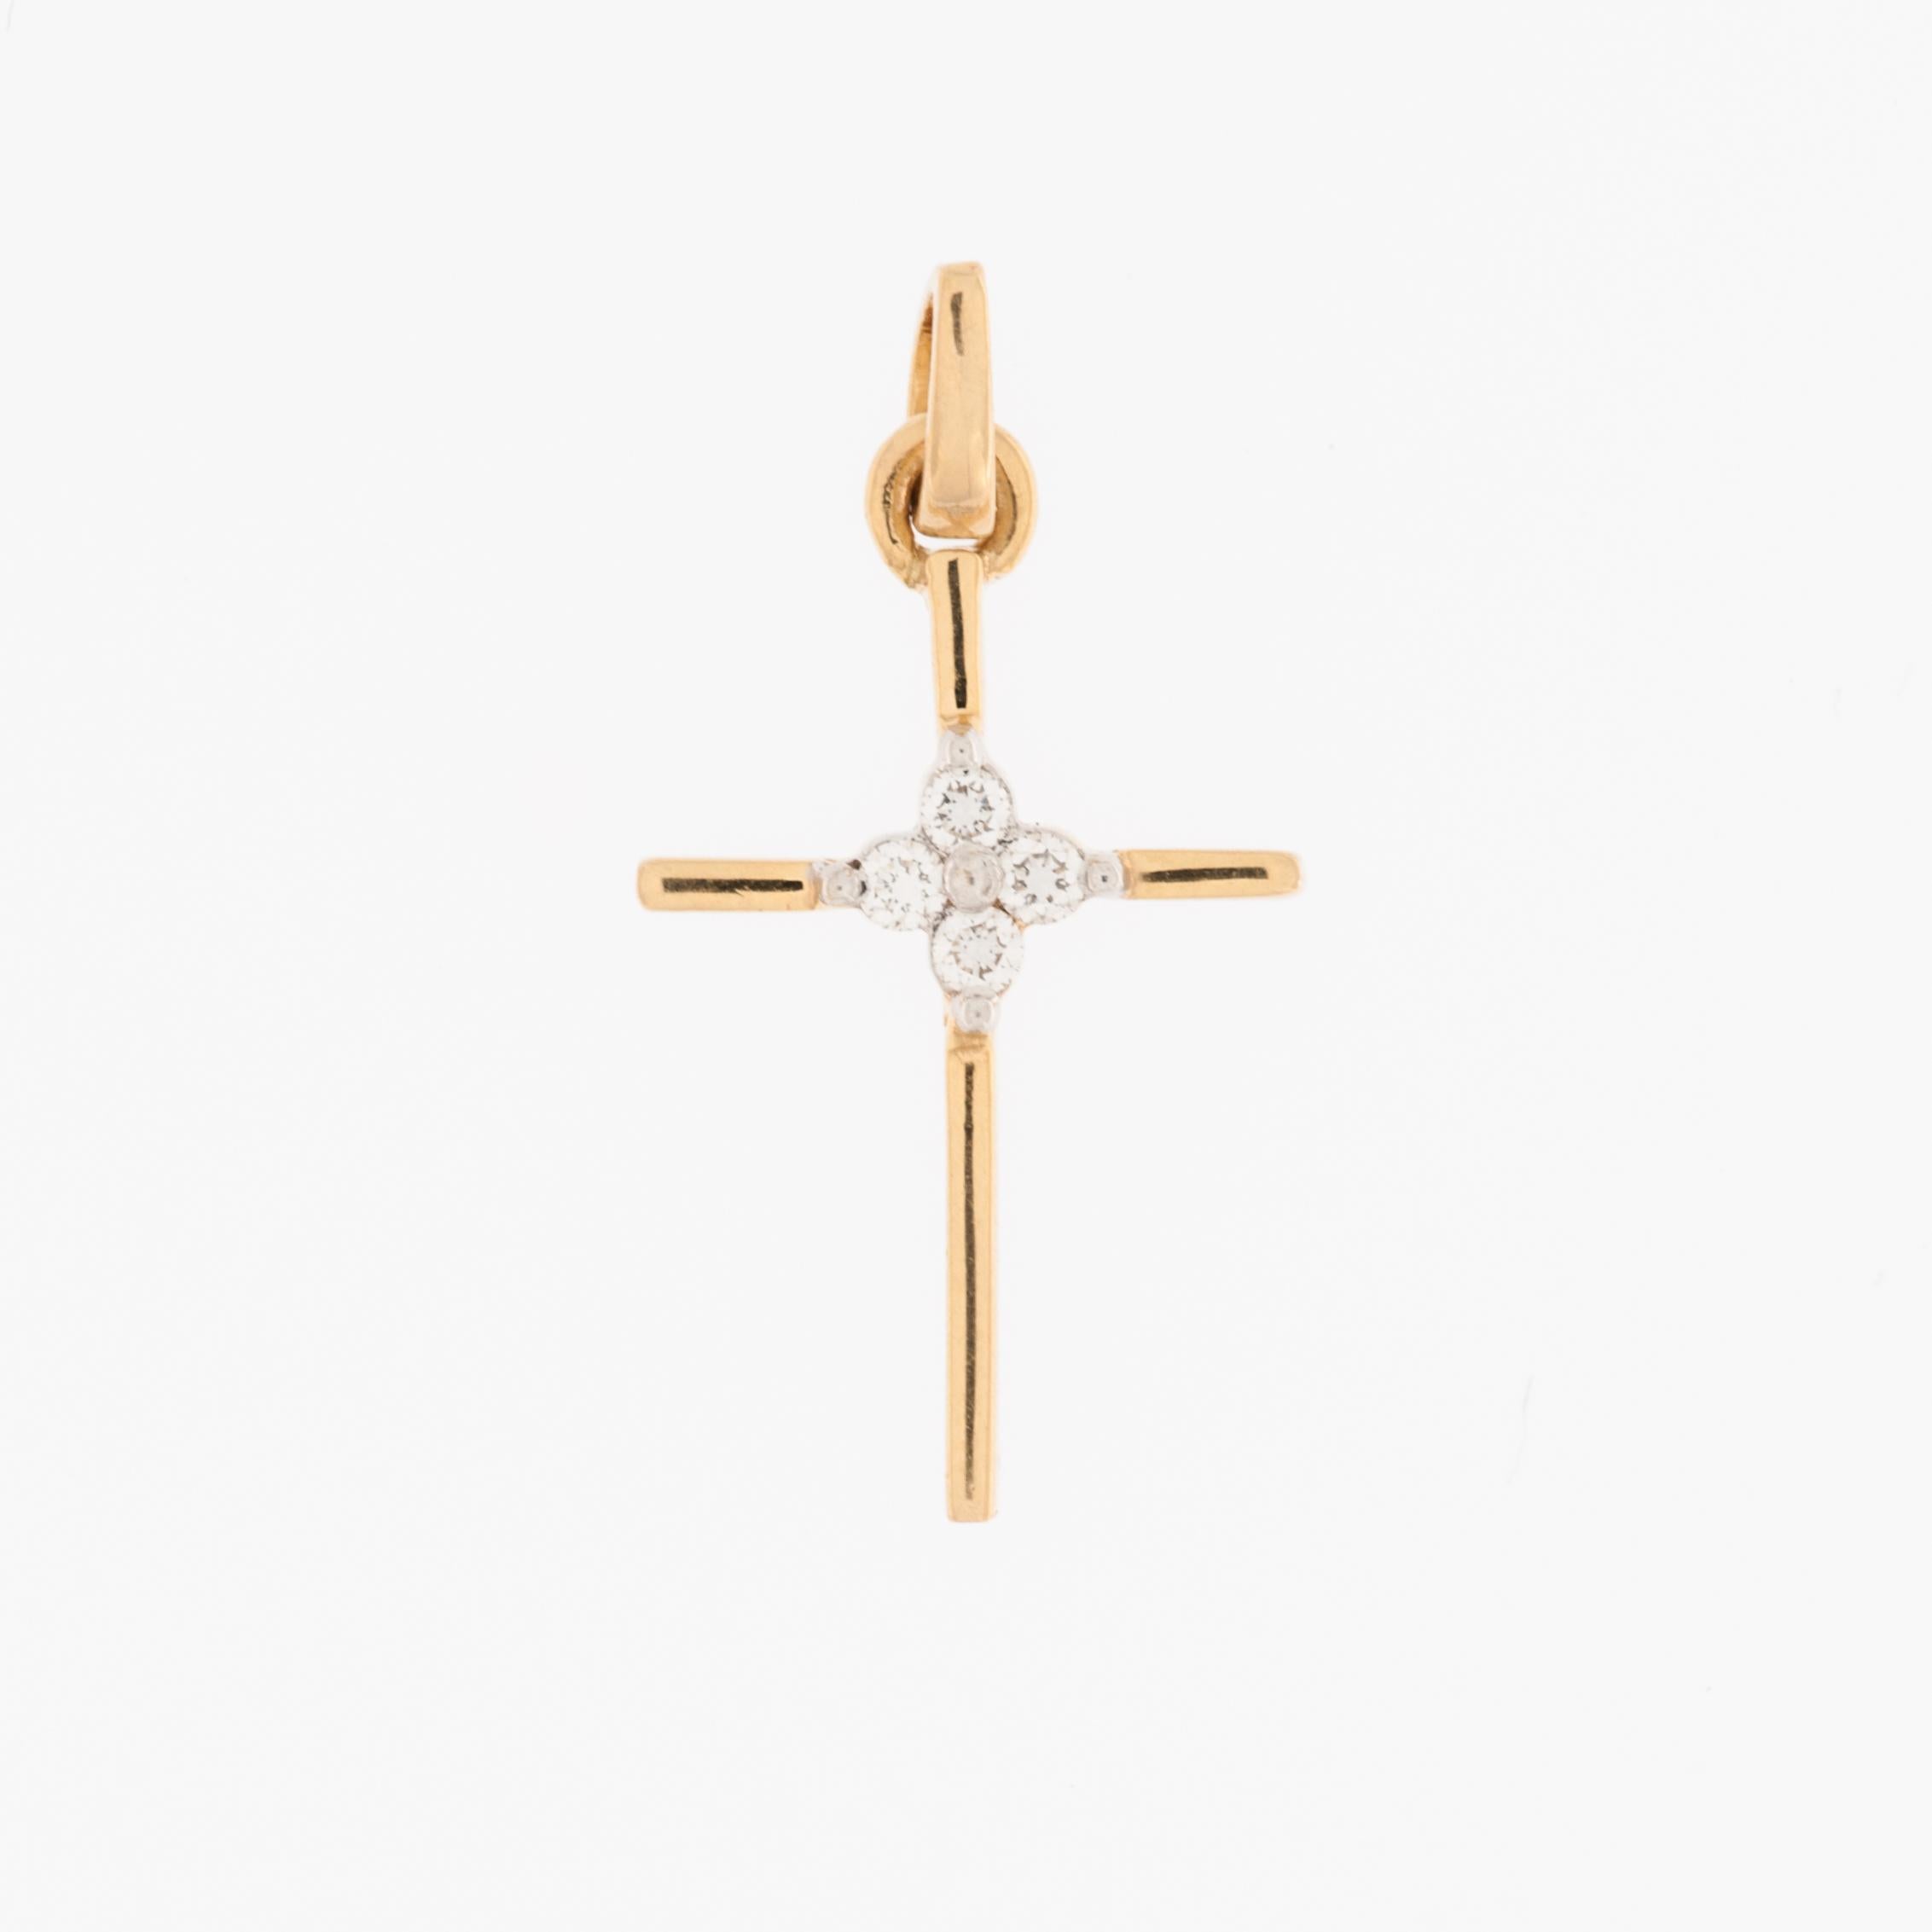 The Vintage 18kt Yellow Gold French Cross is a beautiful and classic piece of jewelry and a religious artifact. 

The term 